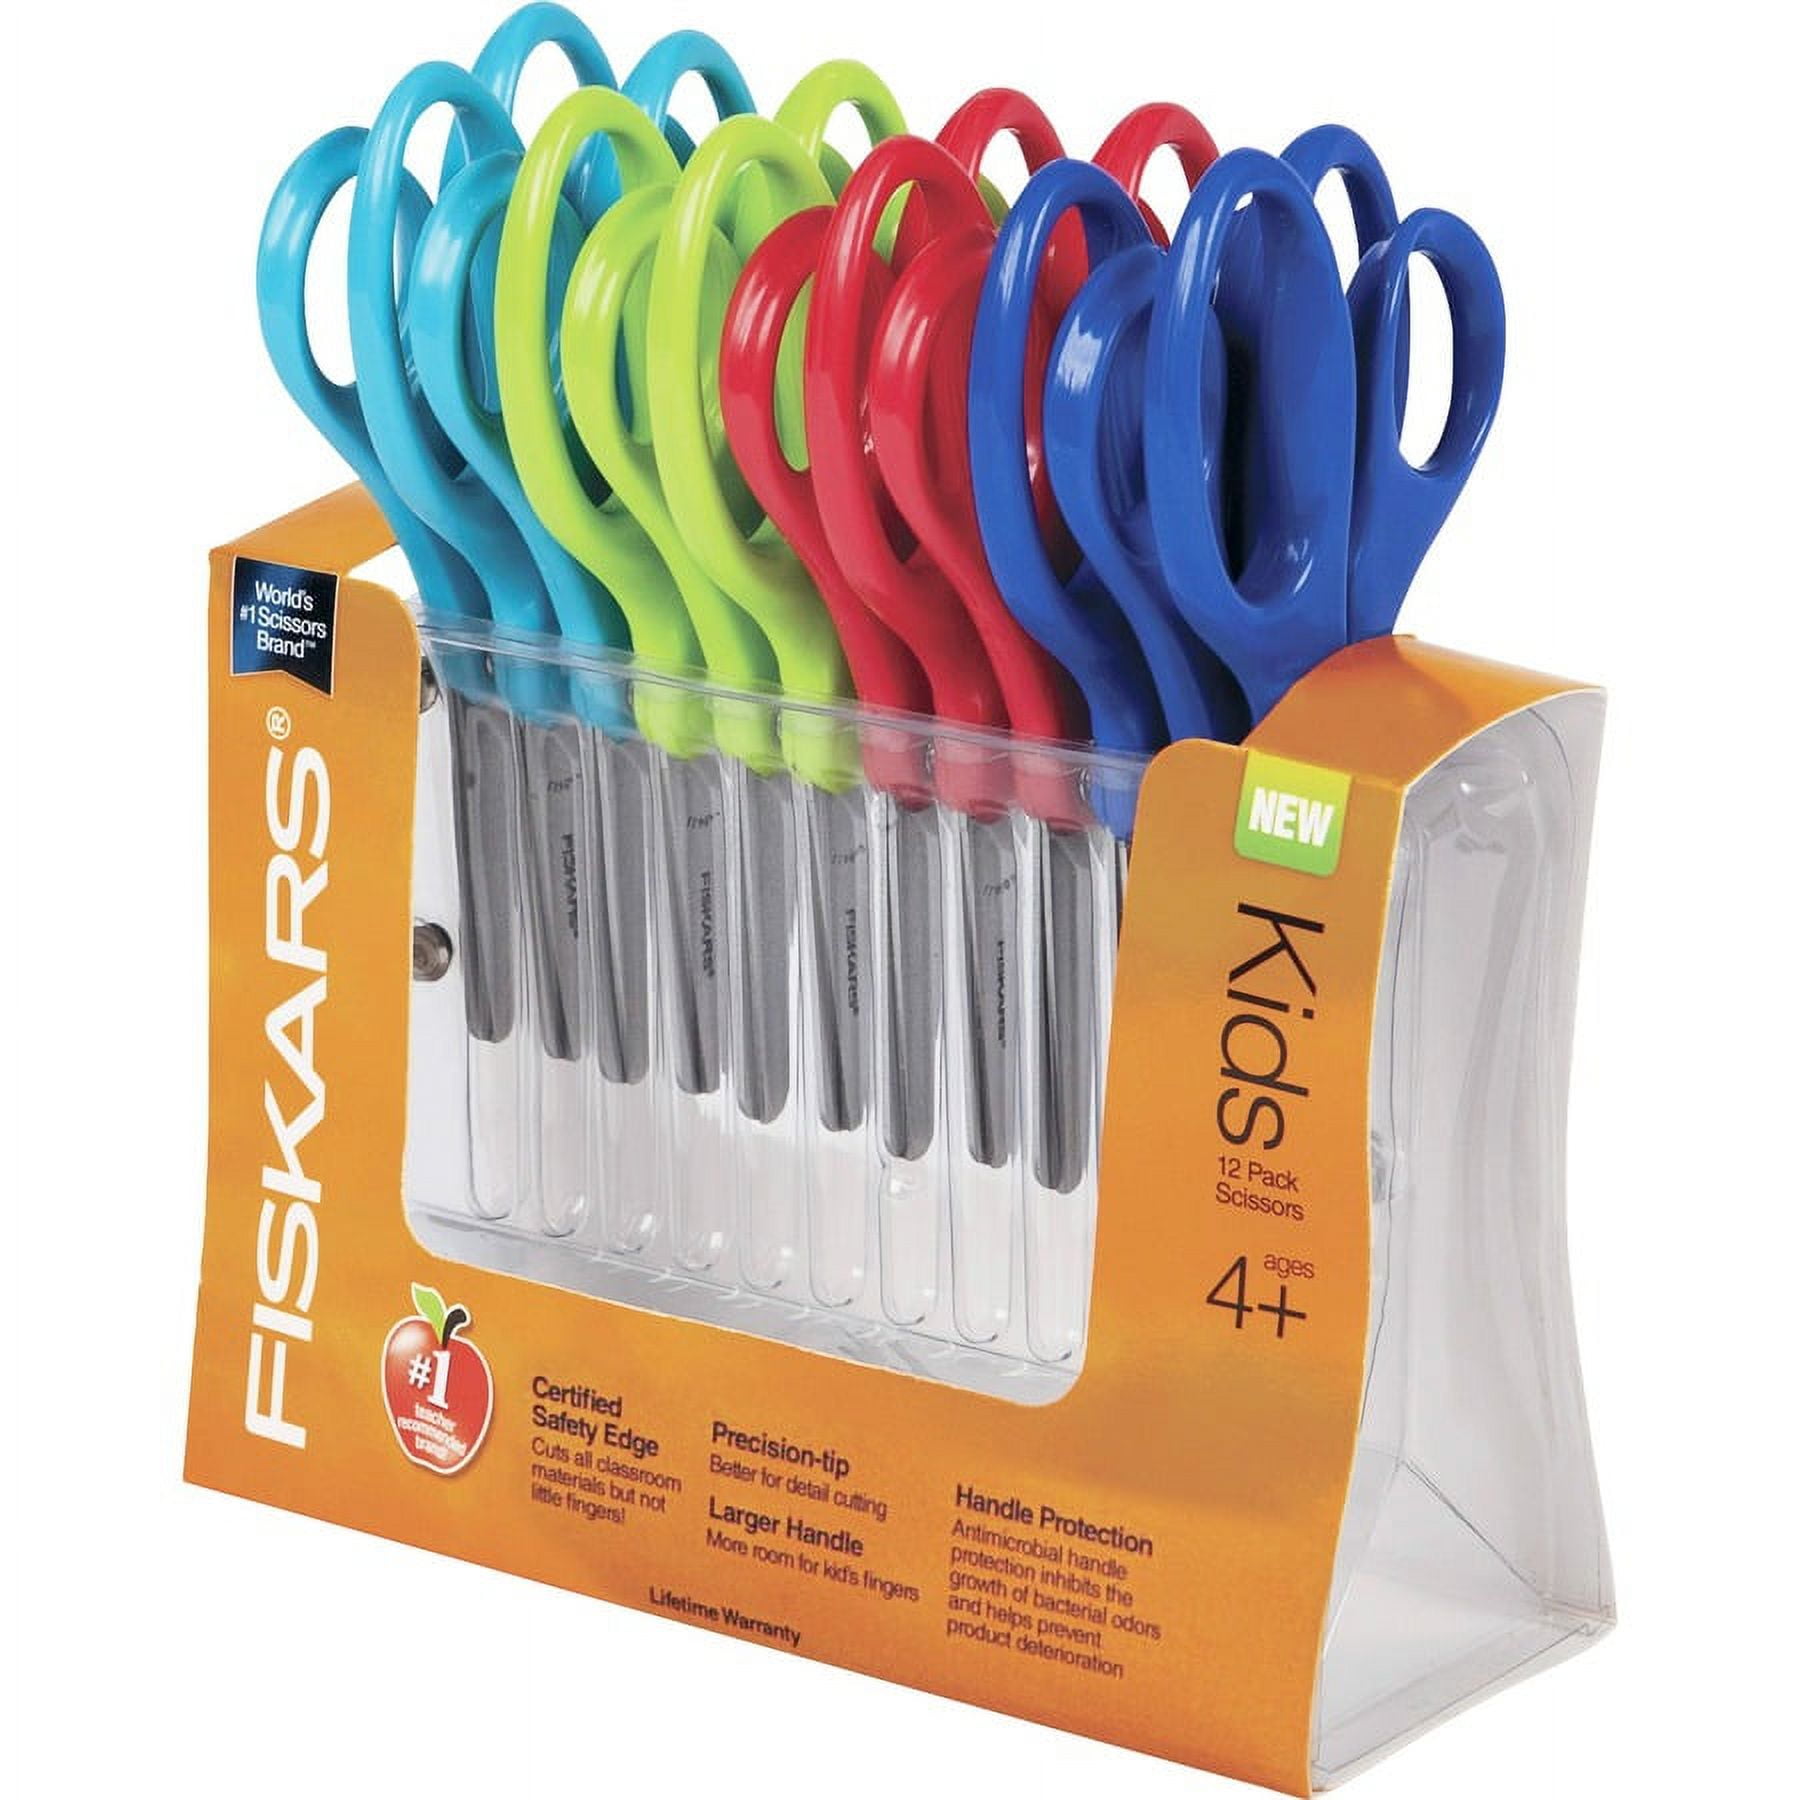 Fiskars Safety-Edge Pointed-tip Kids Scissors - 5 inches - Blue - Includes  Blade Cover